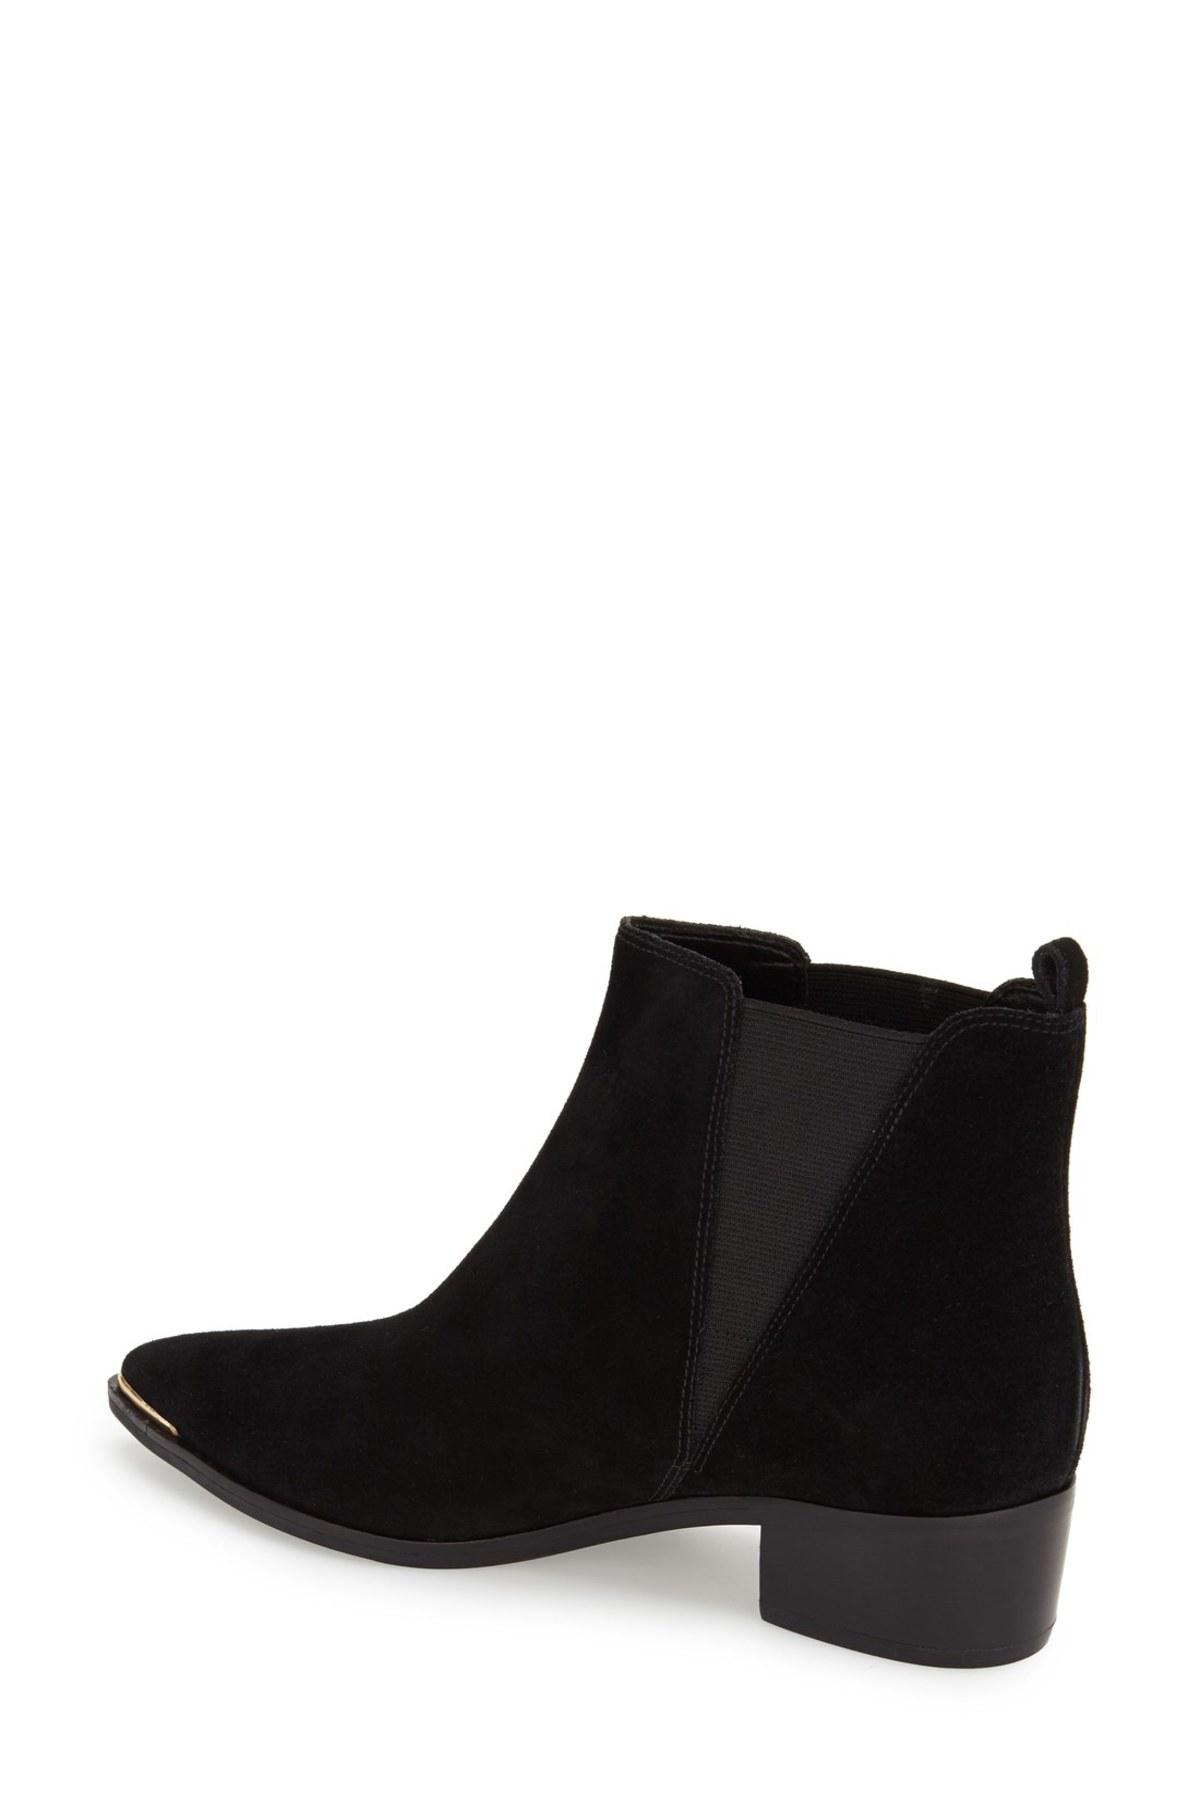 Lyst - Marc Fisher Yale Suede Chelsea Boots in Black